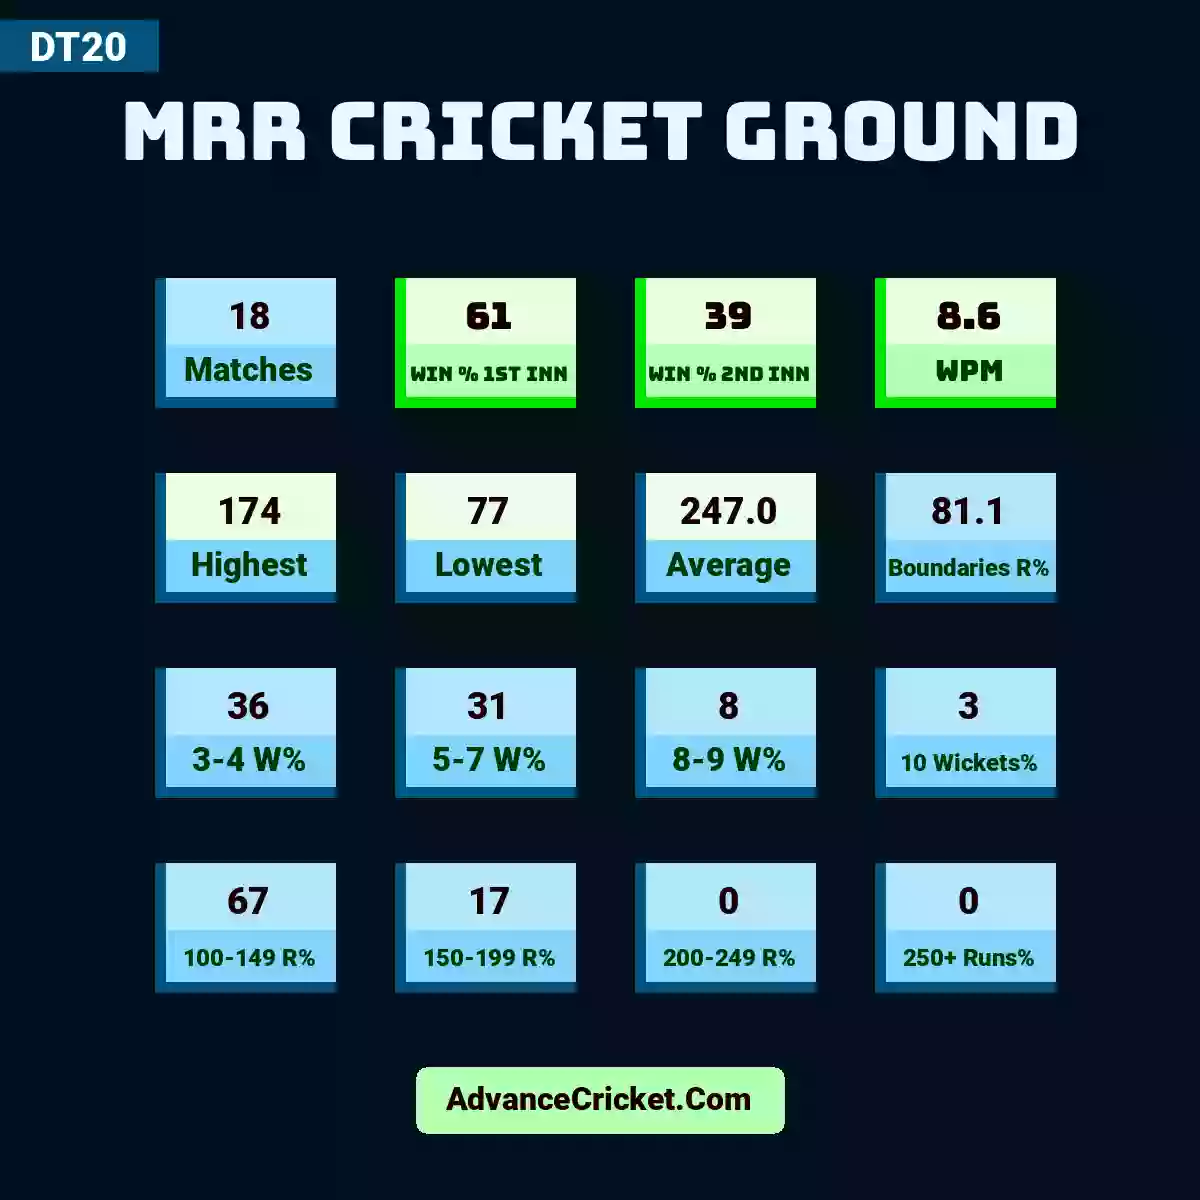 Image showing MRR Cricket Ground with Matches: 18, Win % 1st Inn: 61, Win % 2nd Inn: 39, WPM: 8.6, Highest: 174, Lowest: 77, Average: 247.0, Boundaries R%: 81.1, 3-4 W%: 36, 5-7 W%: 31, 8-9 W%: 8, 10 Wickets%: 3, 100-149 R%: 67, 150-199 R%: 17, 200-249 R%: 0, 250+ Runs%: 0.